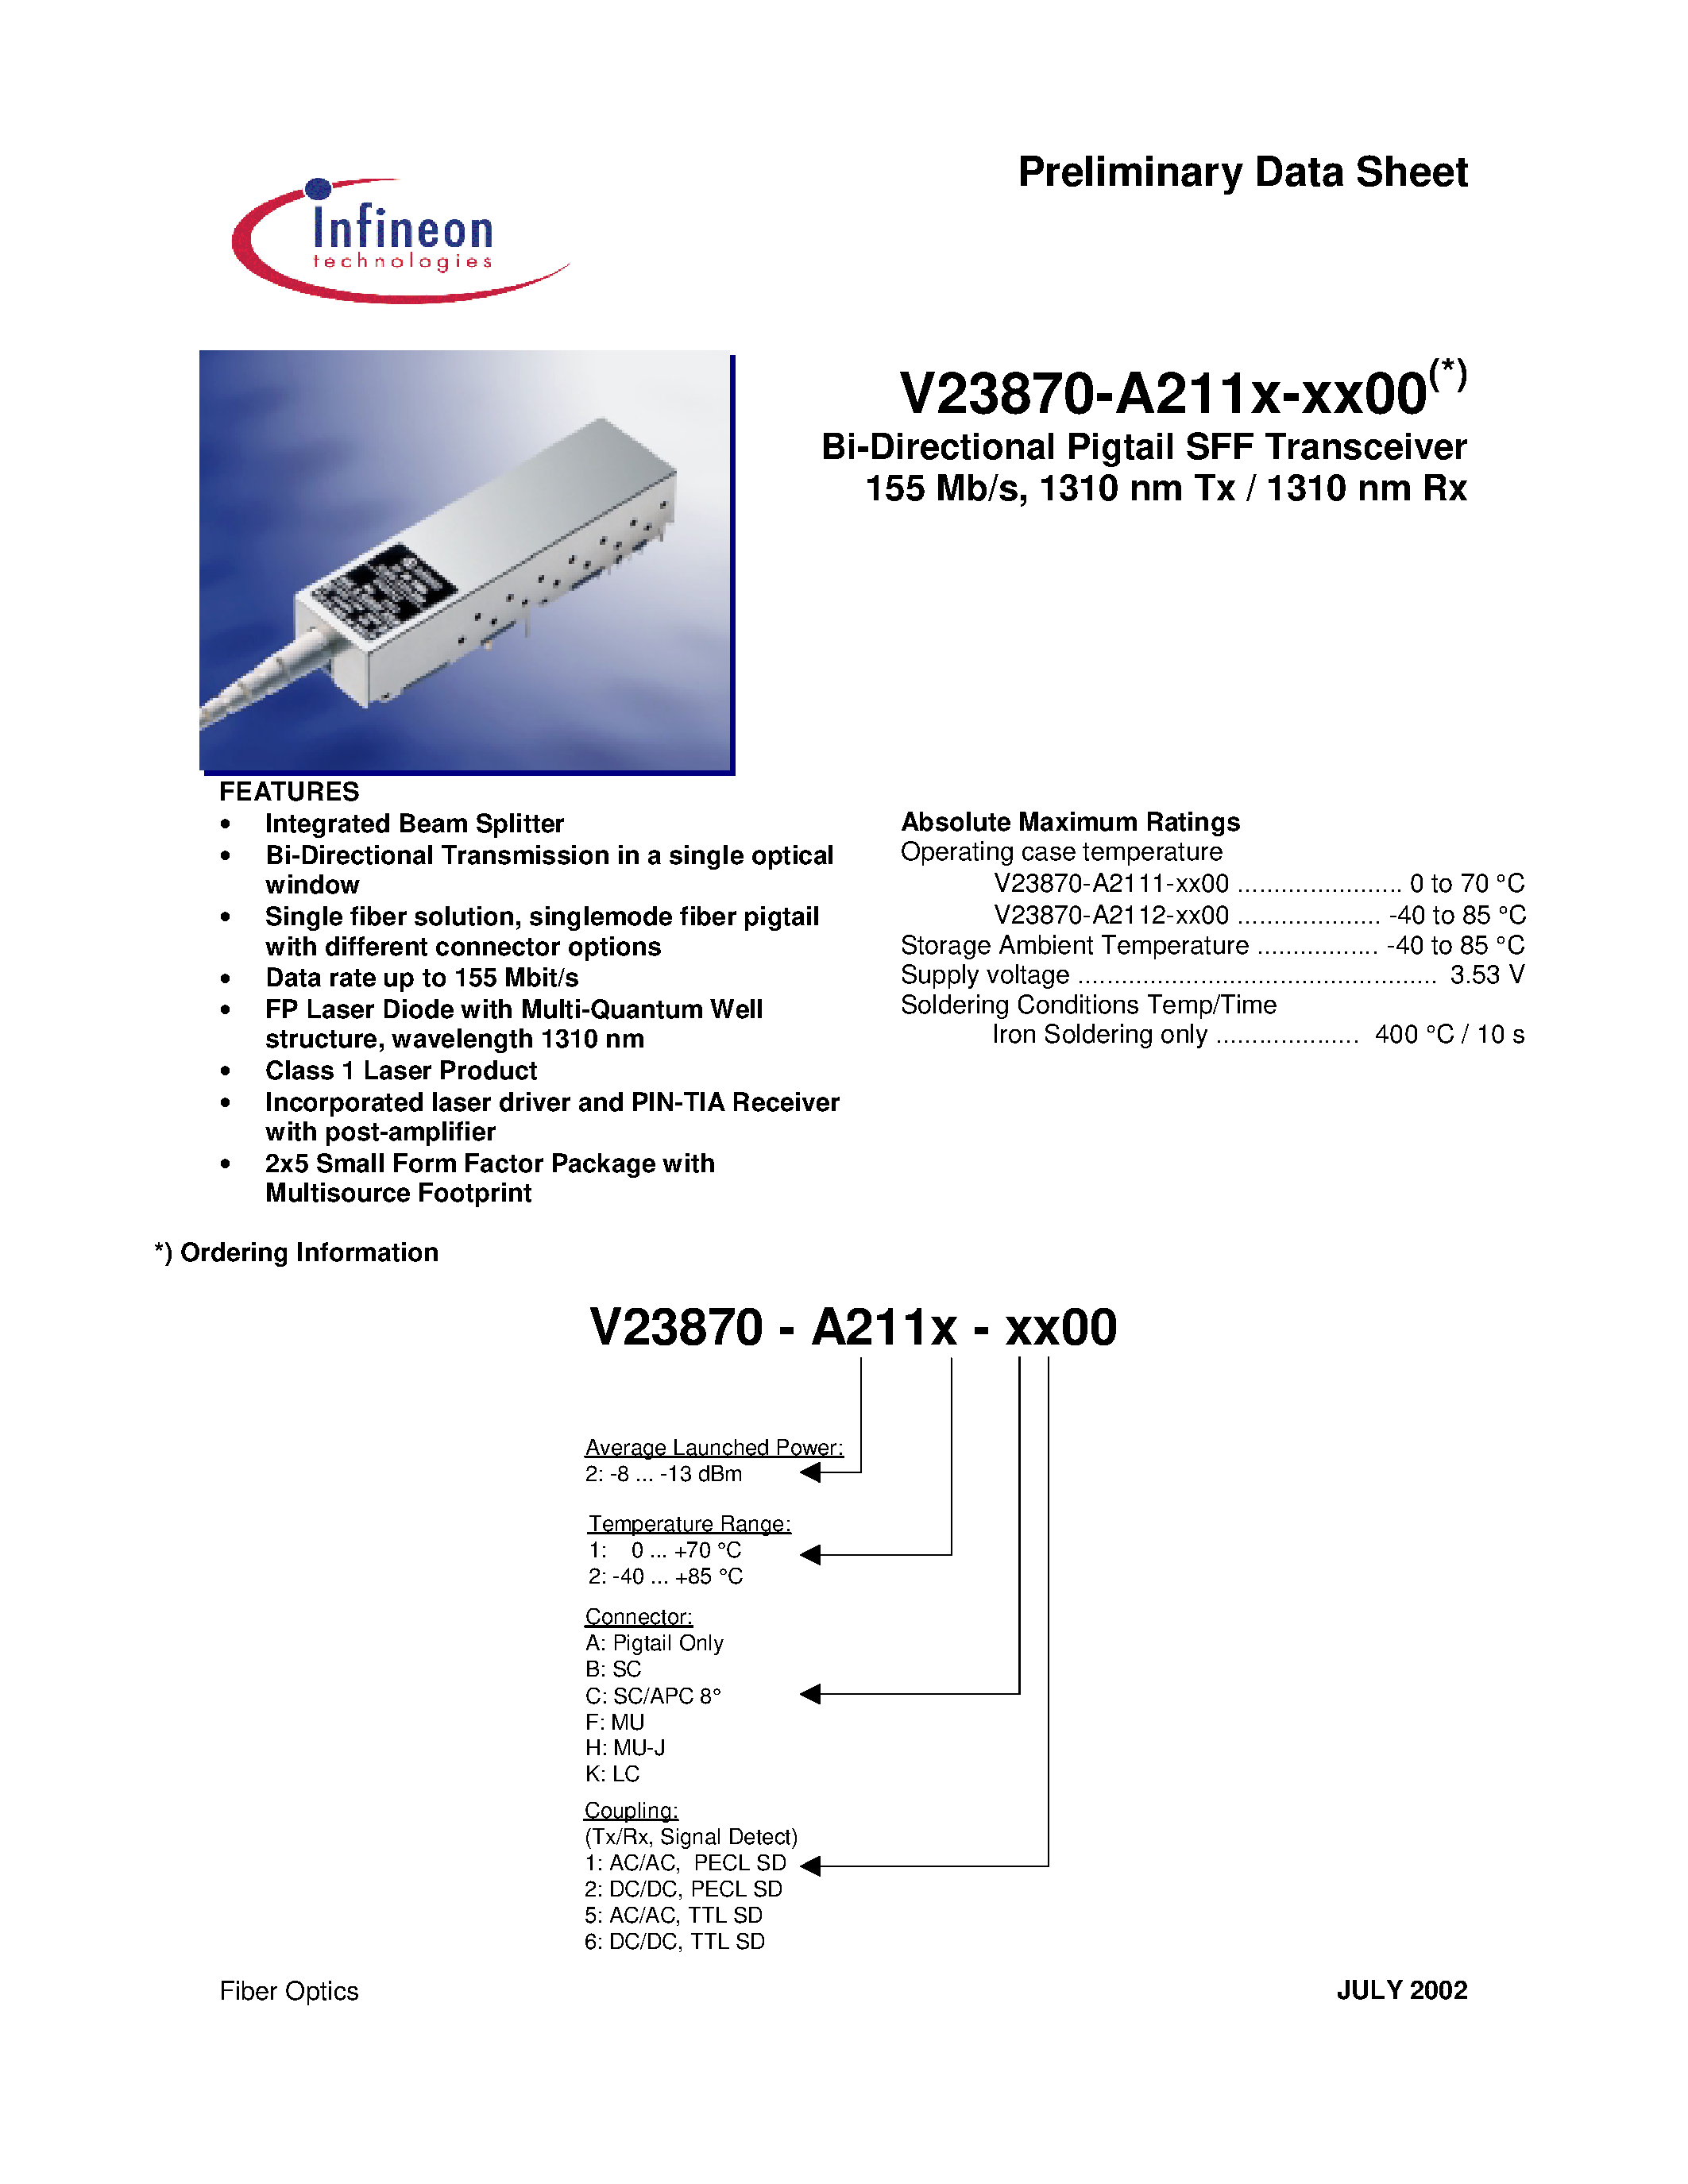 Datasheet V23870-A2111-H500 - Bi-Directional Pigtail SFF Transceiver 155 Mb/s/ 1310 nm Tx / 1310 nm Rx page 1